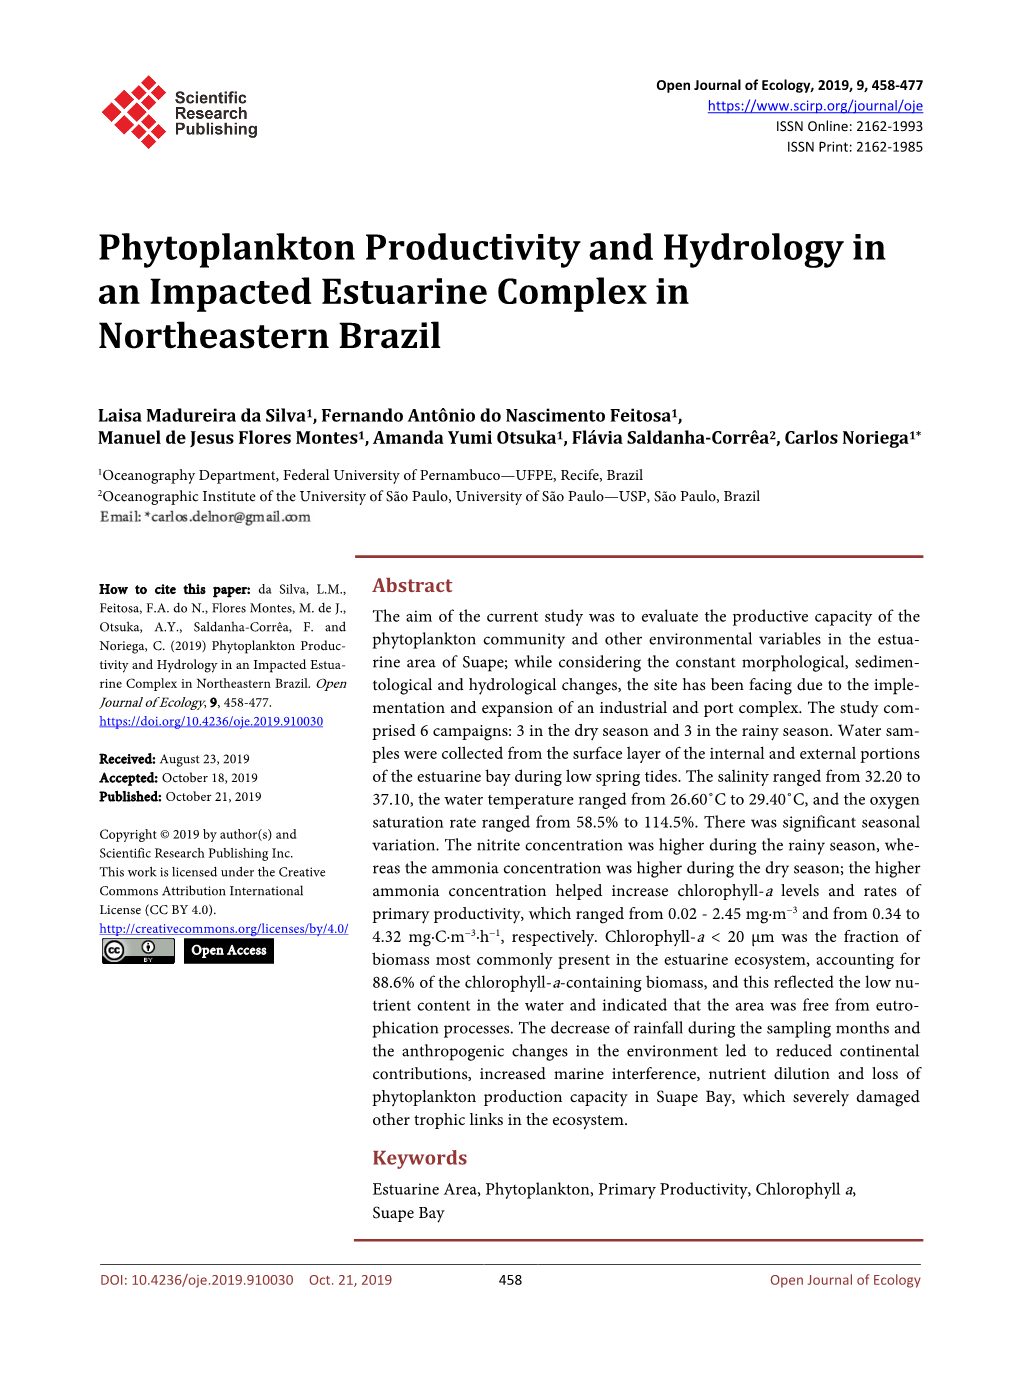 Phytoplankton Productivity and Hydrology in an Impacted Estuarine Complex in Northeastern Brazil